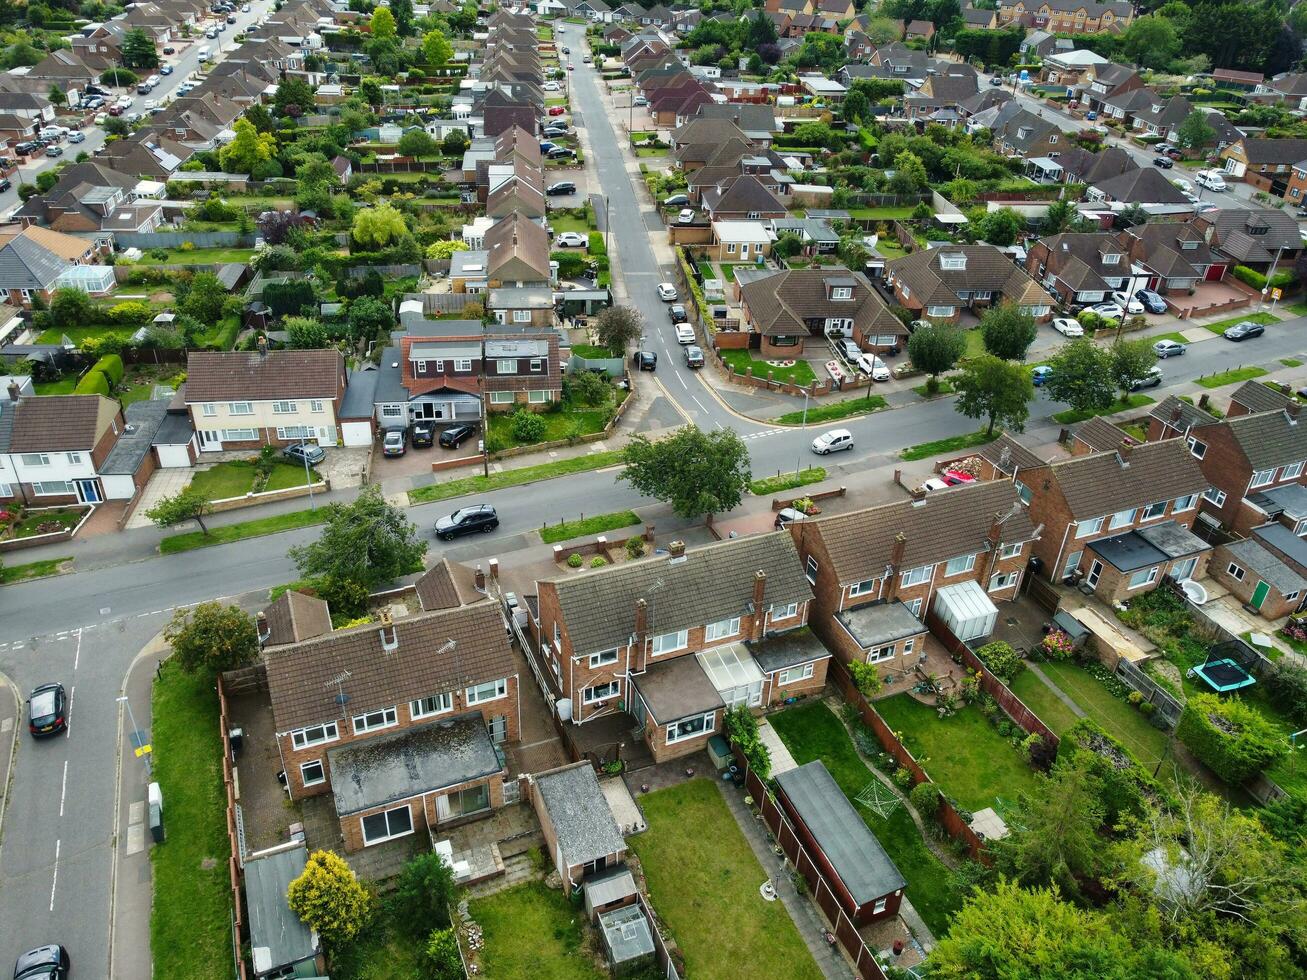 High Angle View of Western Luton City and Residential District. Aerial View of Captured with Drone's Camera on 30th July, 2023. England, UK photo